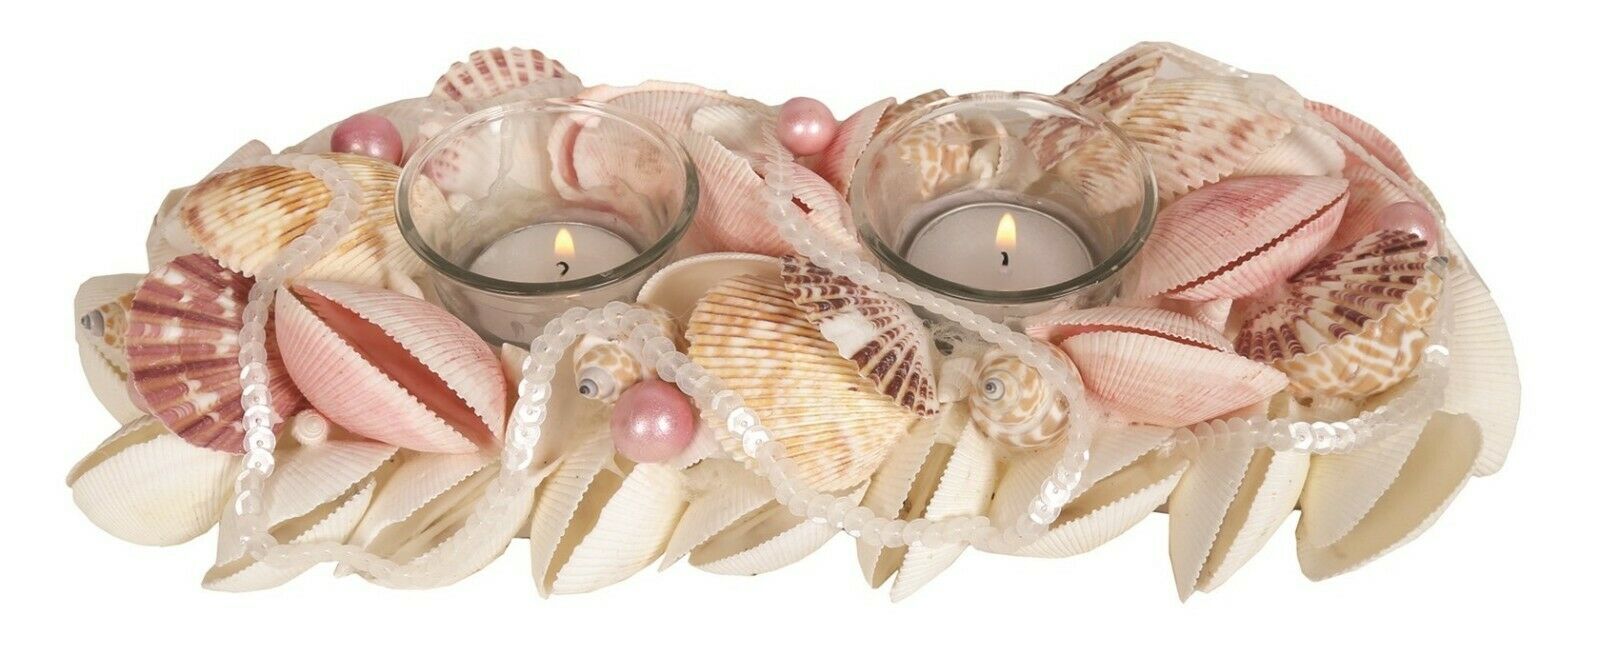 Decorative Sea Shell Tea Light Holder Pink Accents Holds 2 Tea Lights Candles